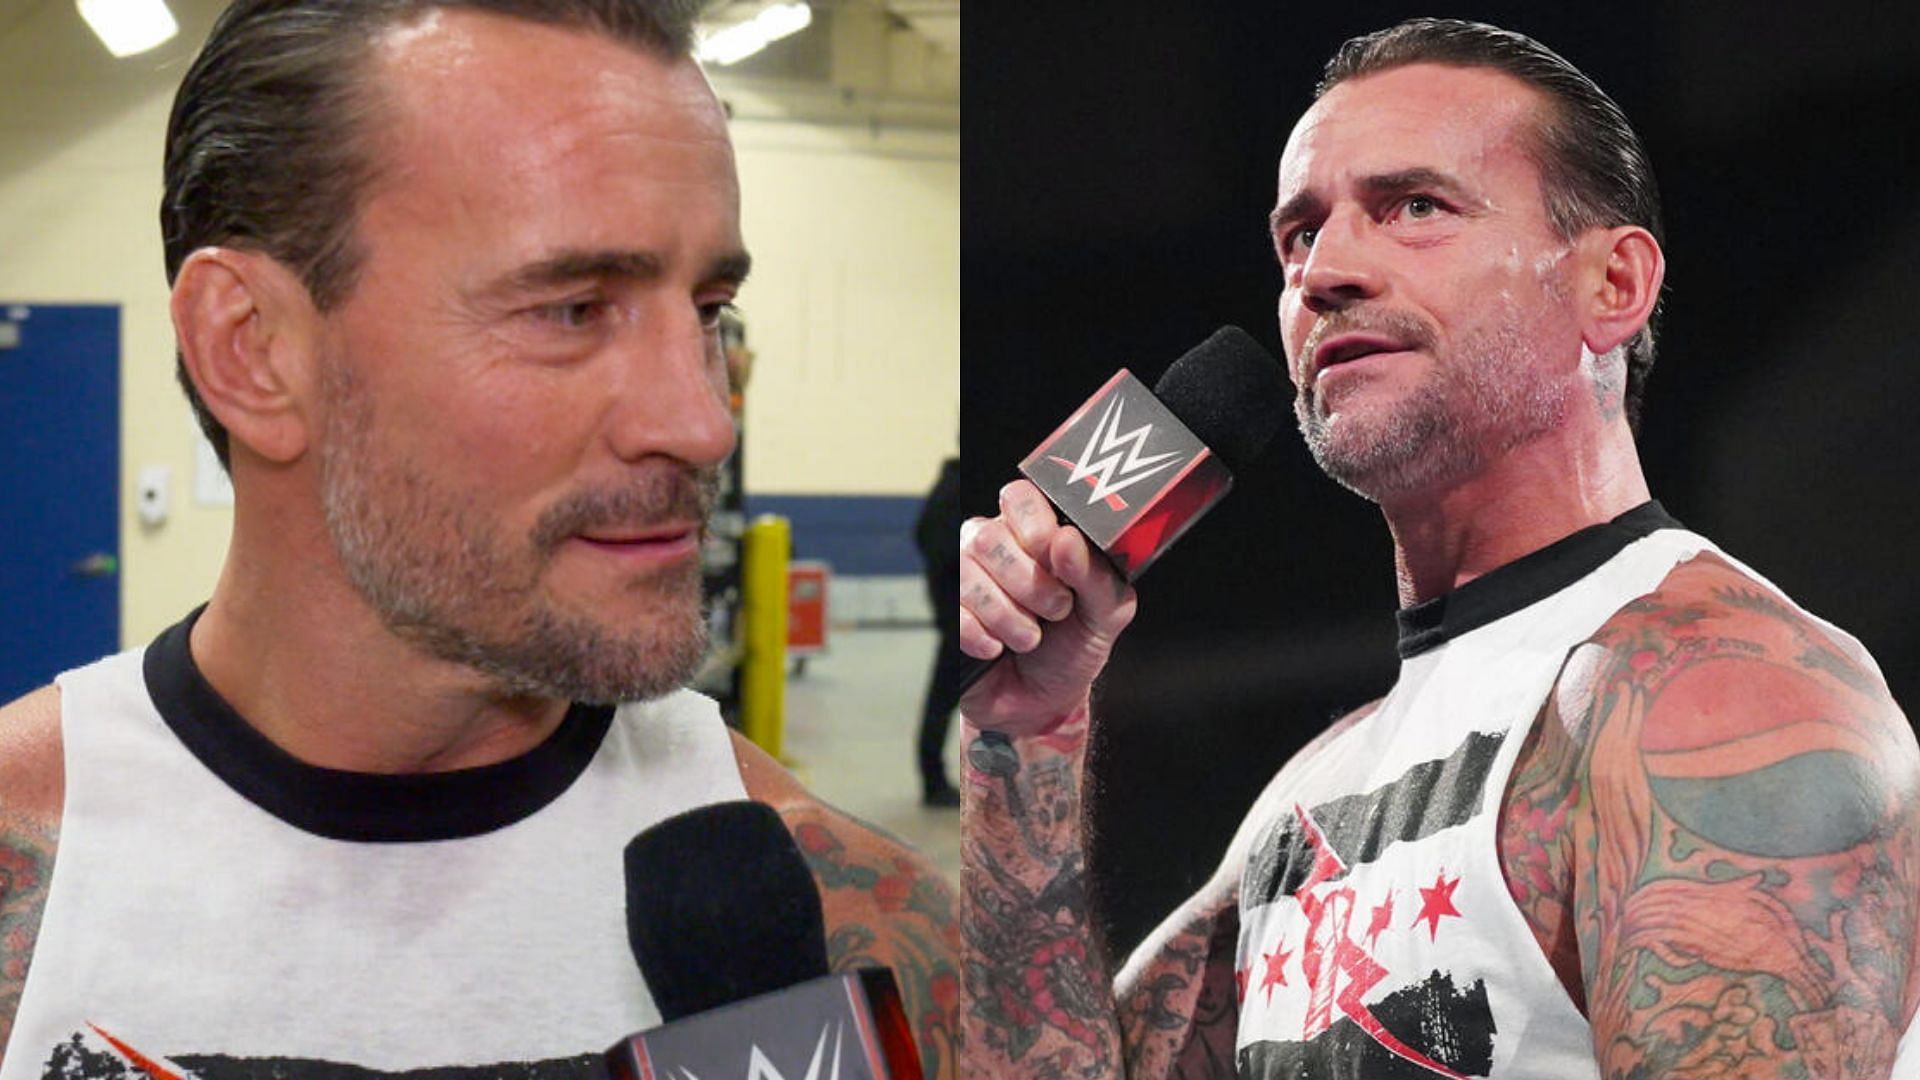 Punk is currently out of action with an injury.